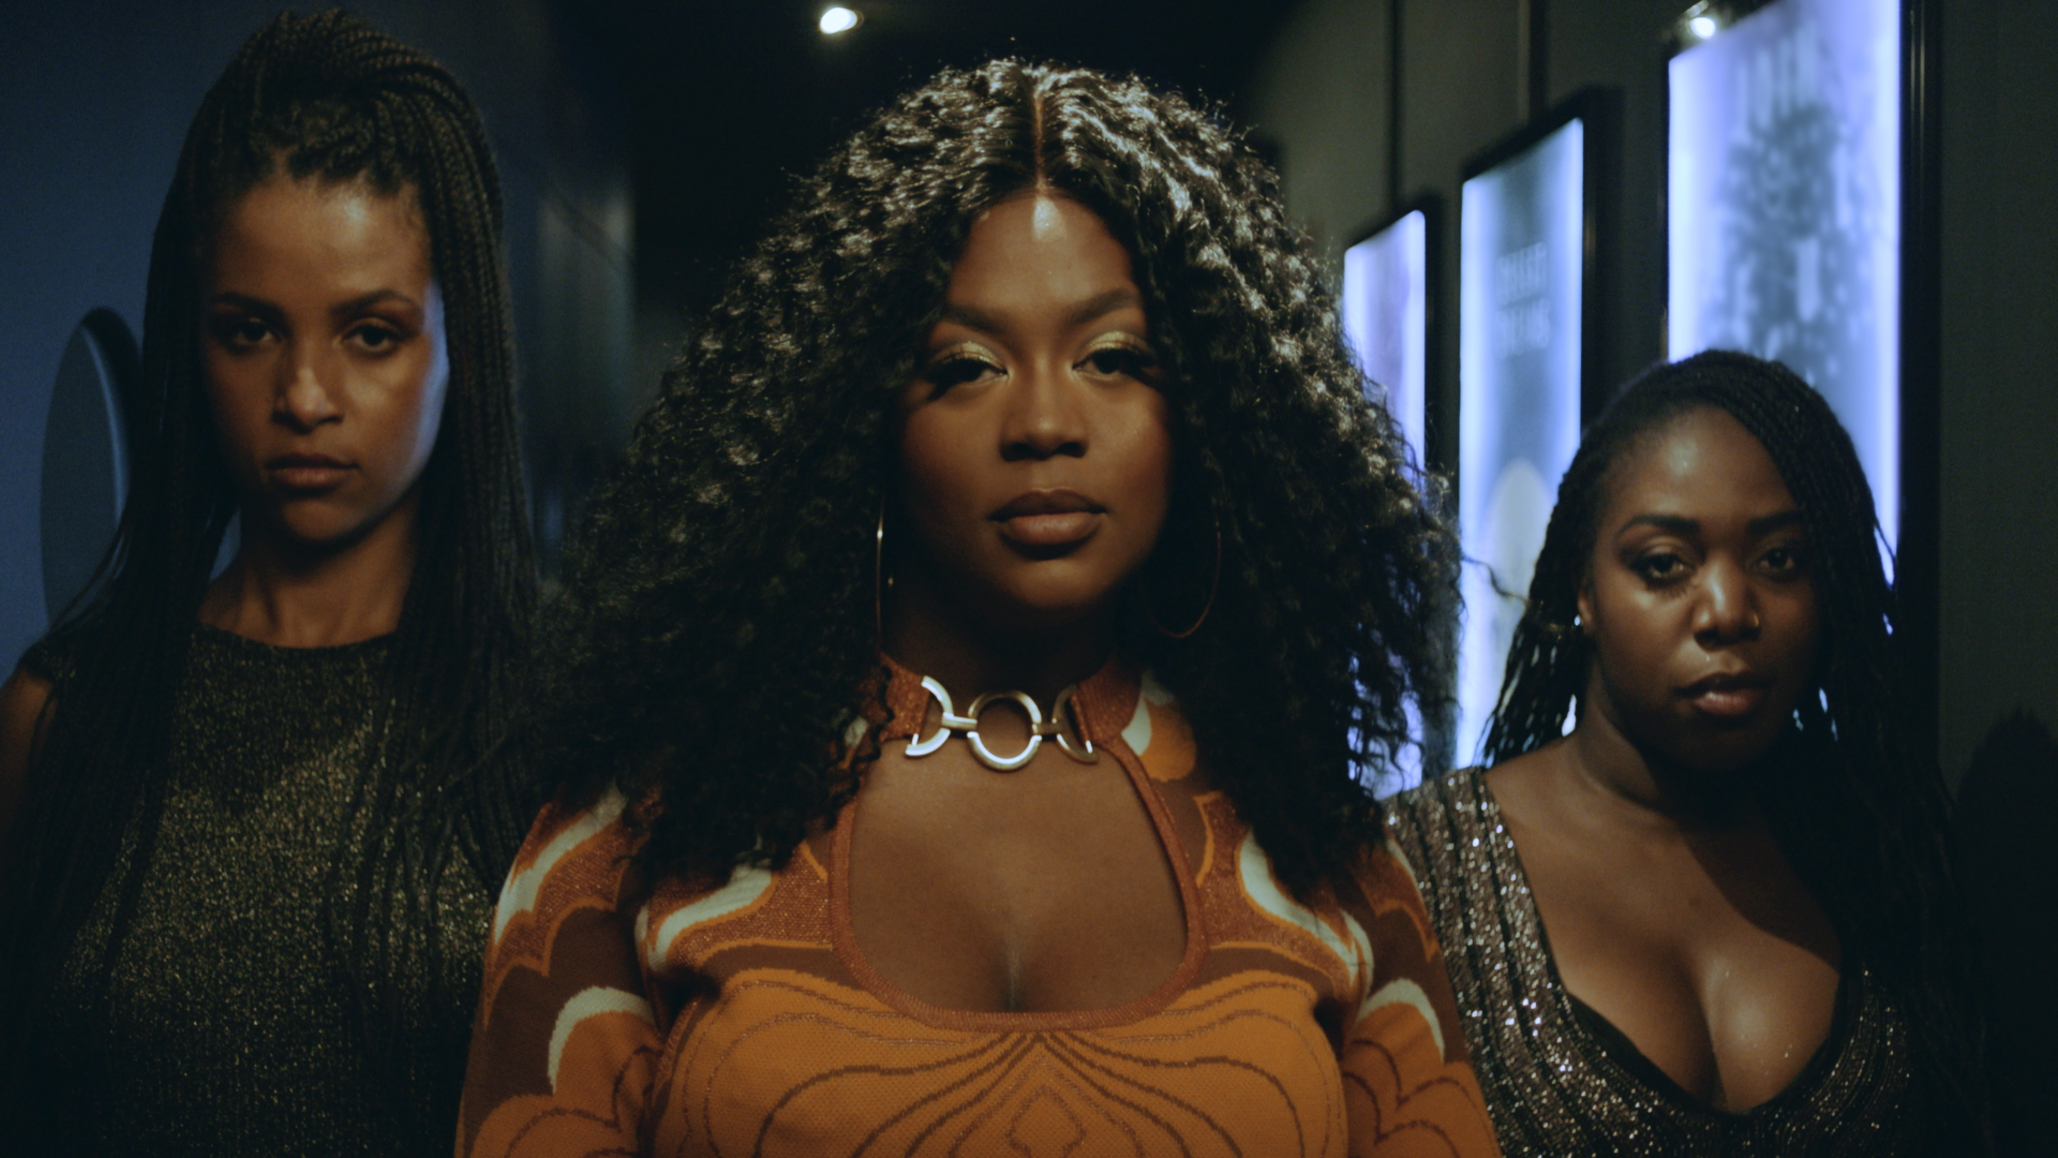 PRICIE and Genesis Owusu are front and centre in stylish music video for ‘FRIENDZONE’